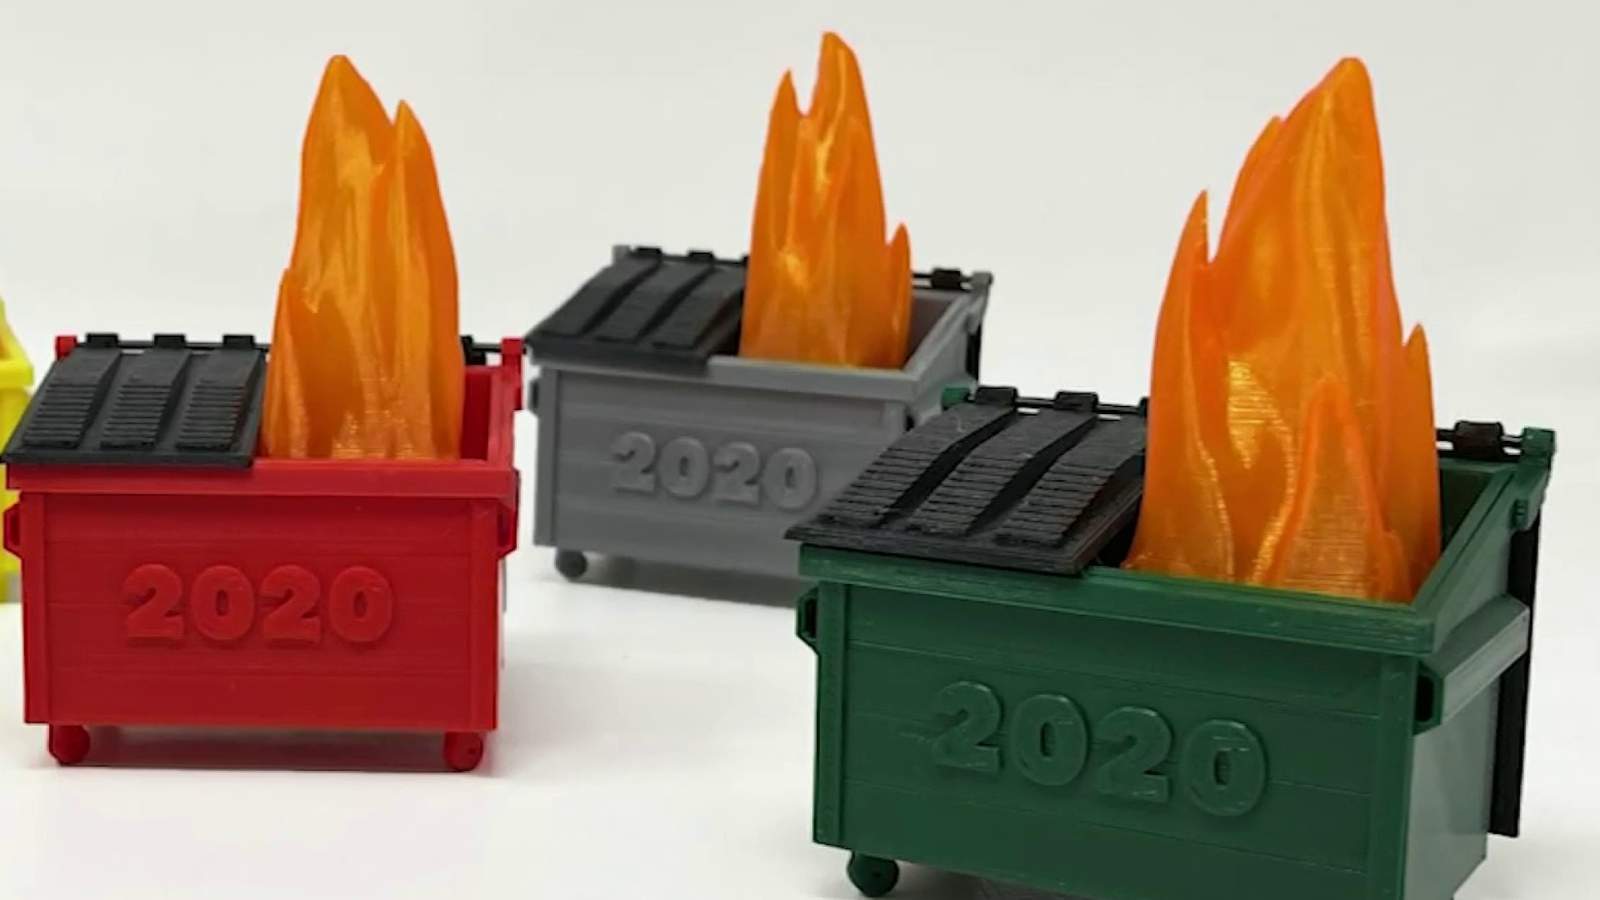 2020-themed ‘dumpster fire’ items bring laughter to rough year